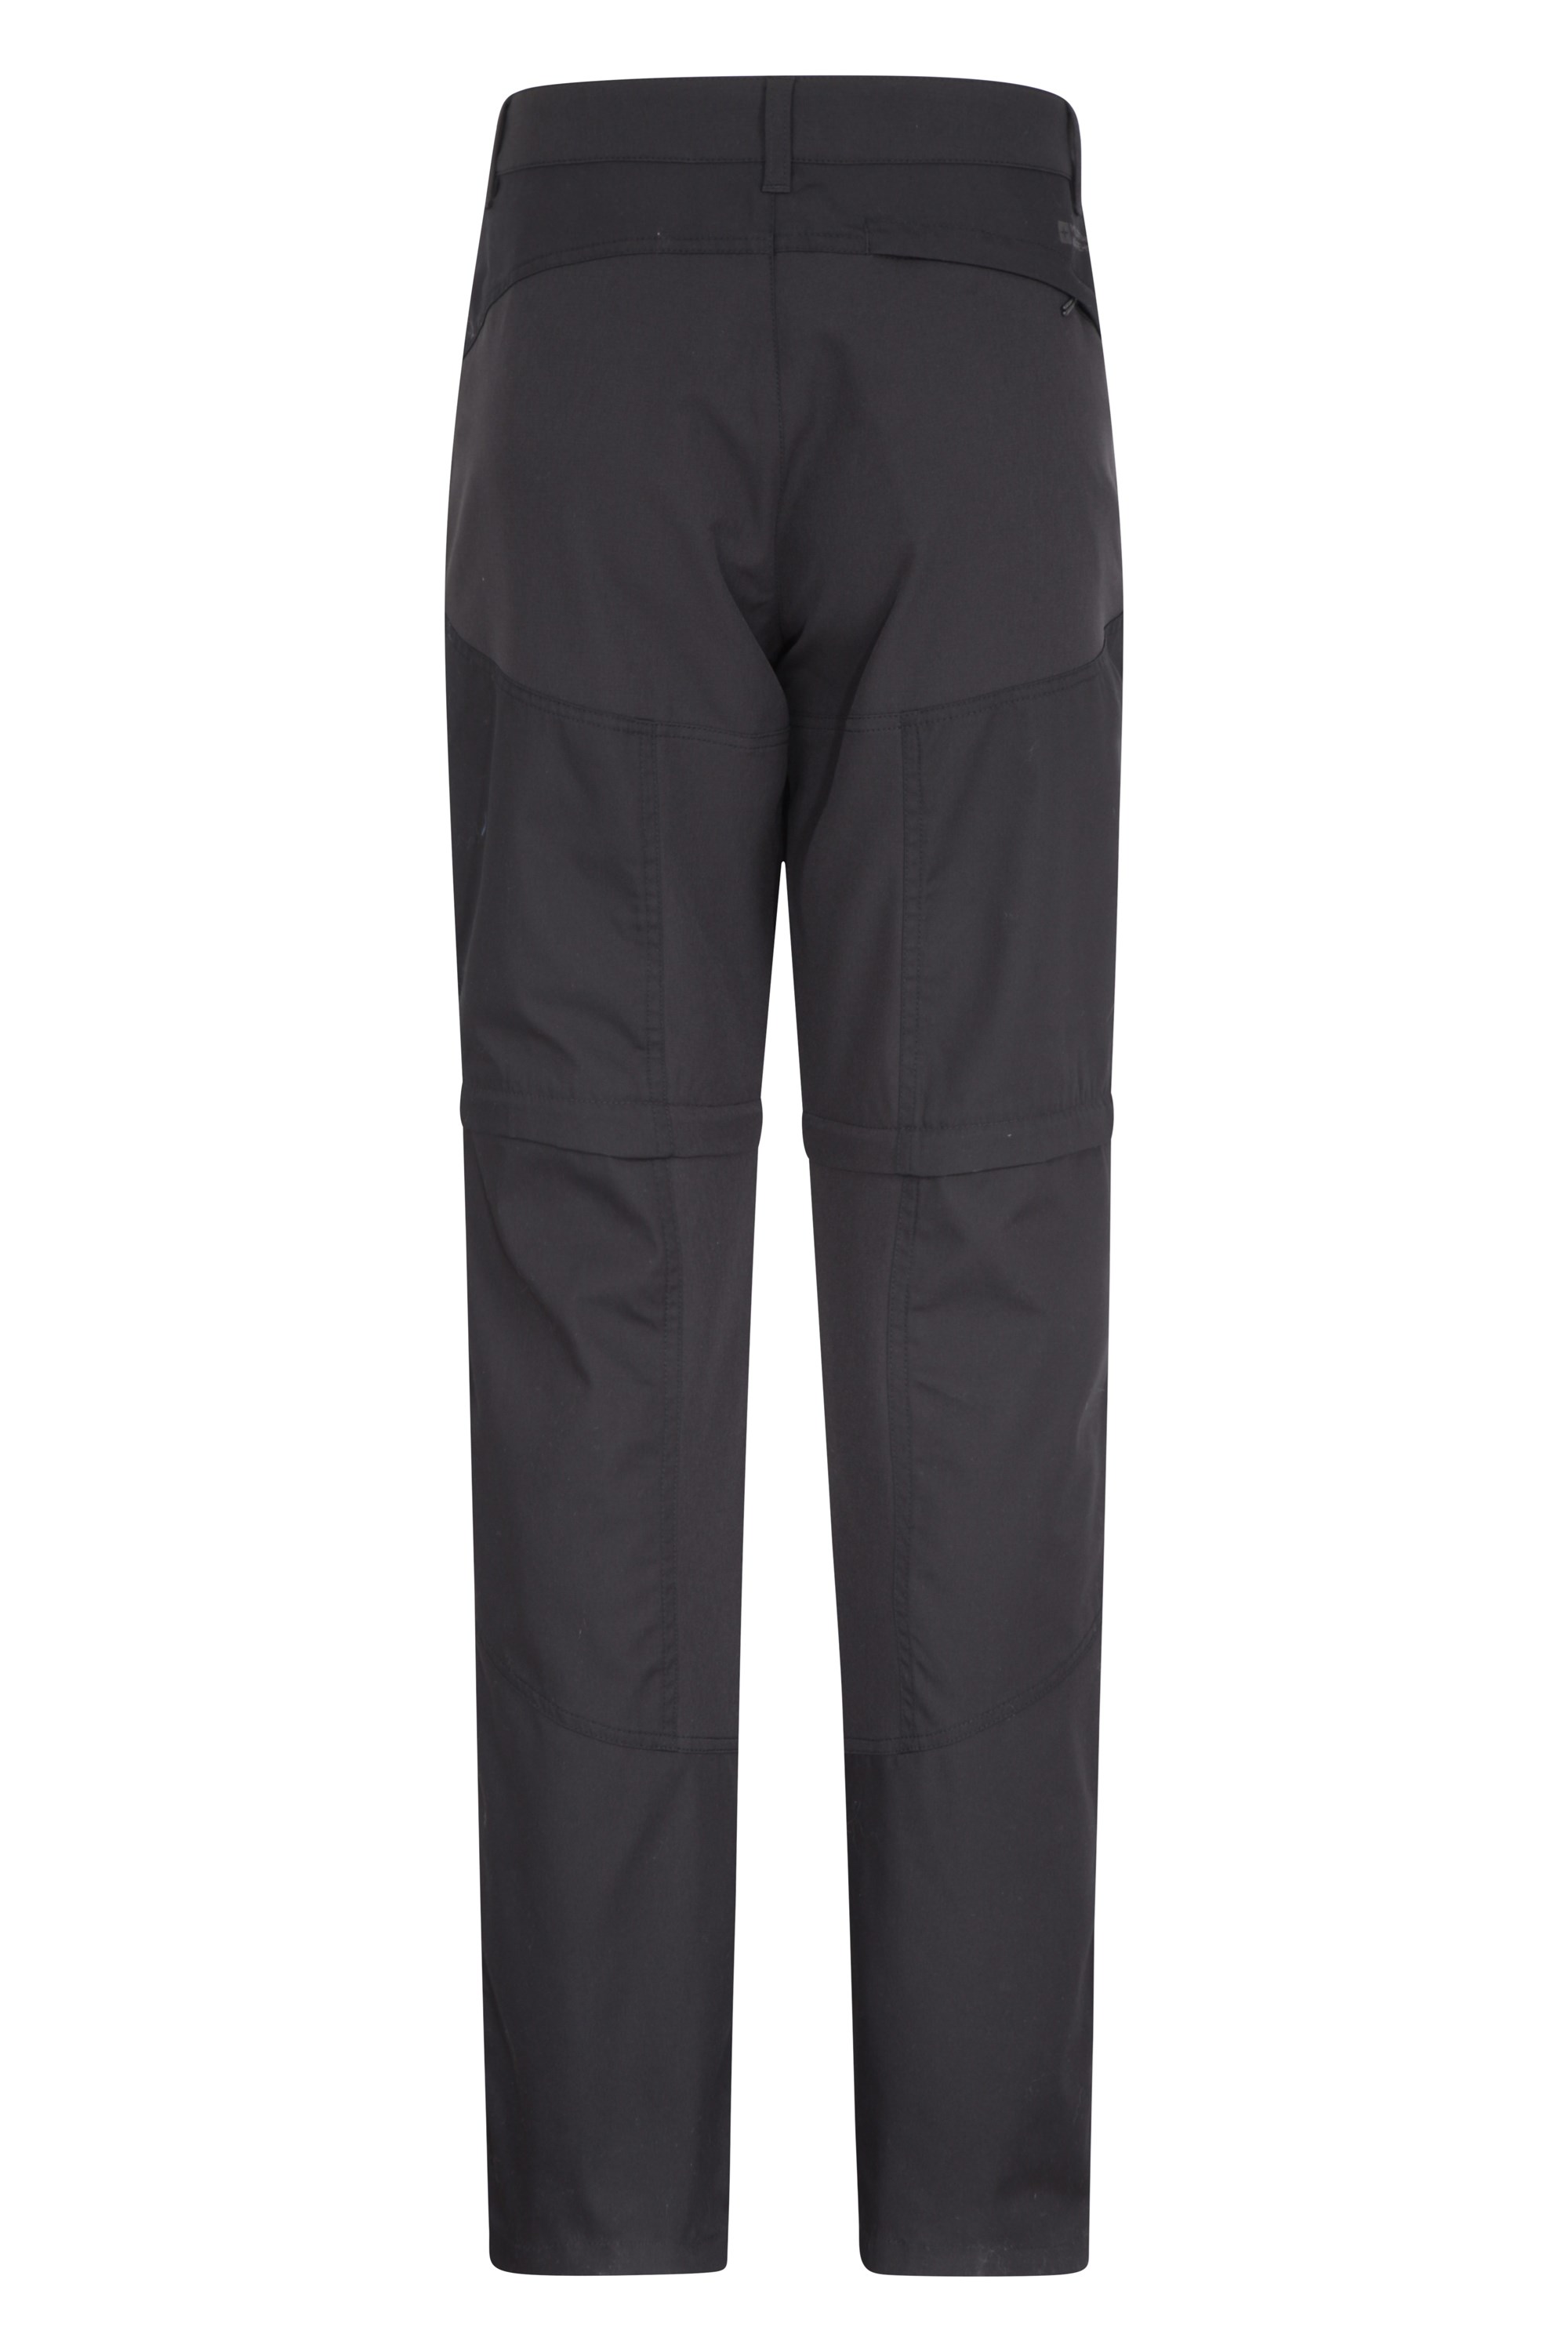 Expedition Womens Zip-Off Hiking Pants - Long Length